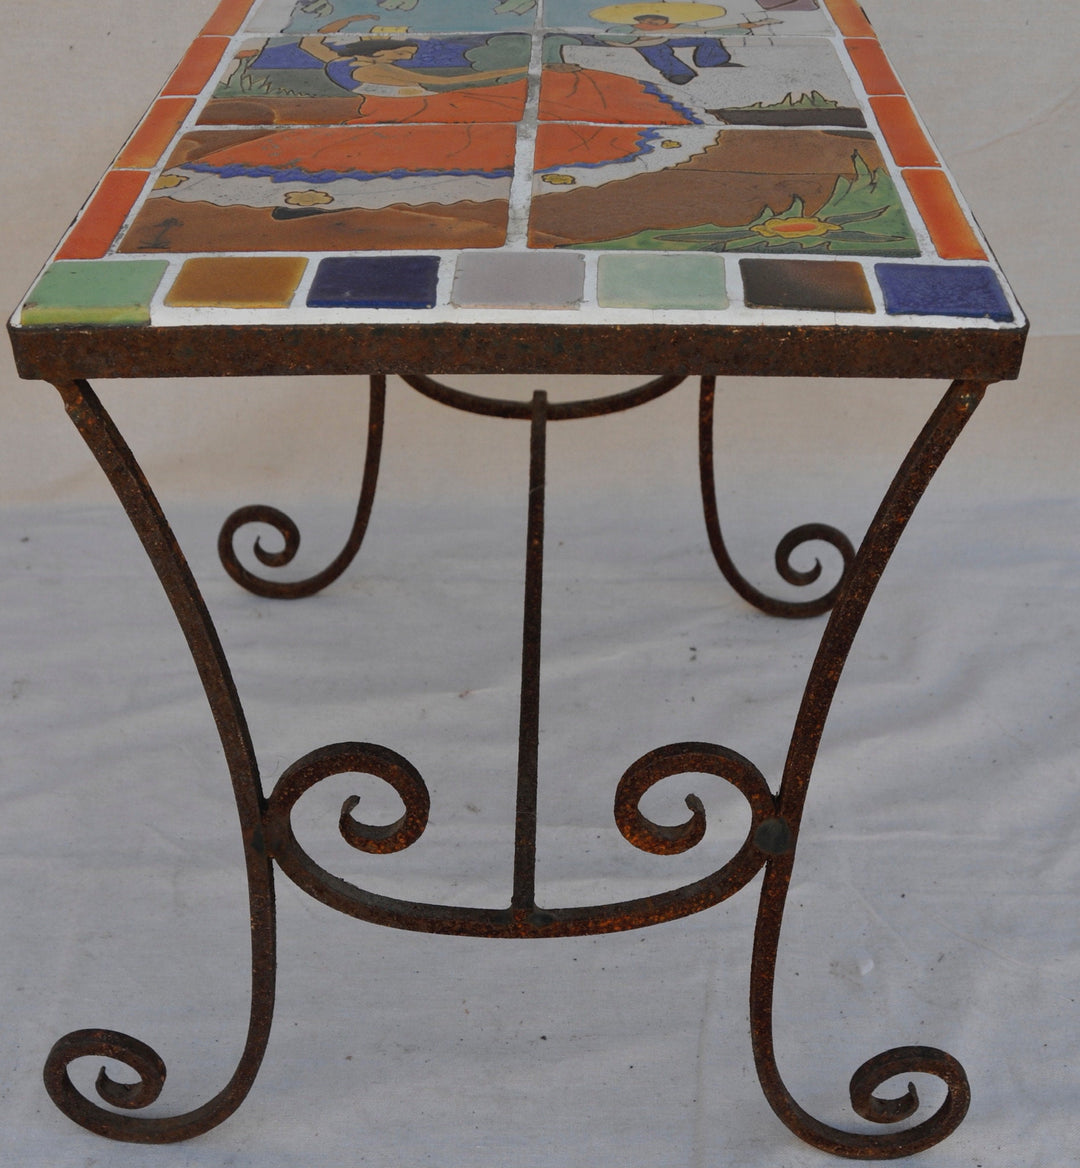 San Josè Tile, Scenic Table with Wrought Iron